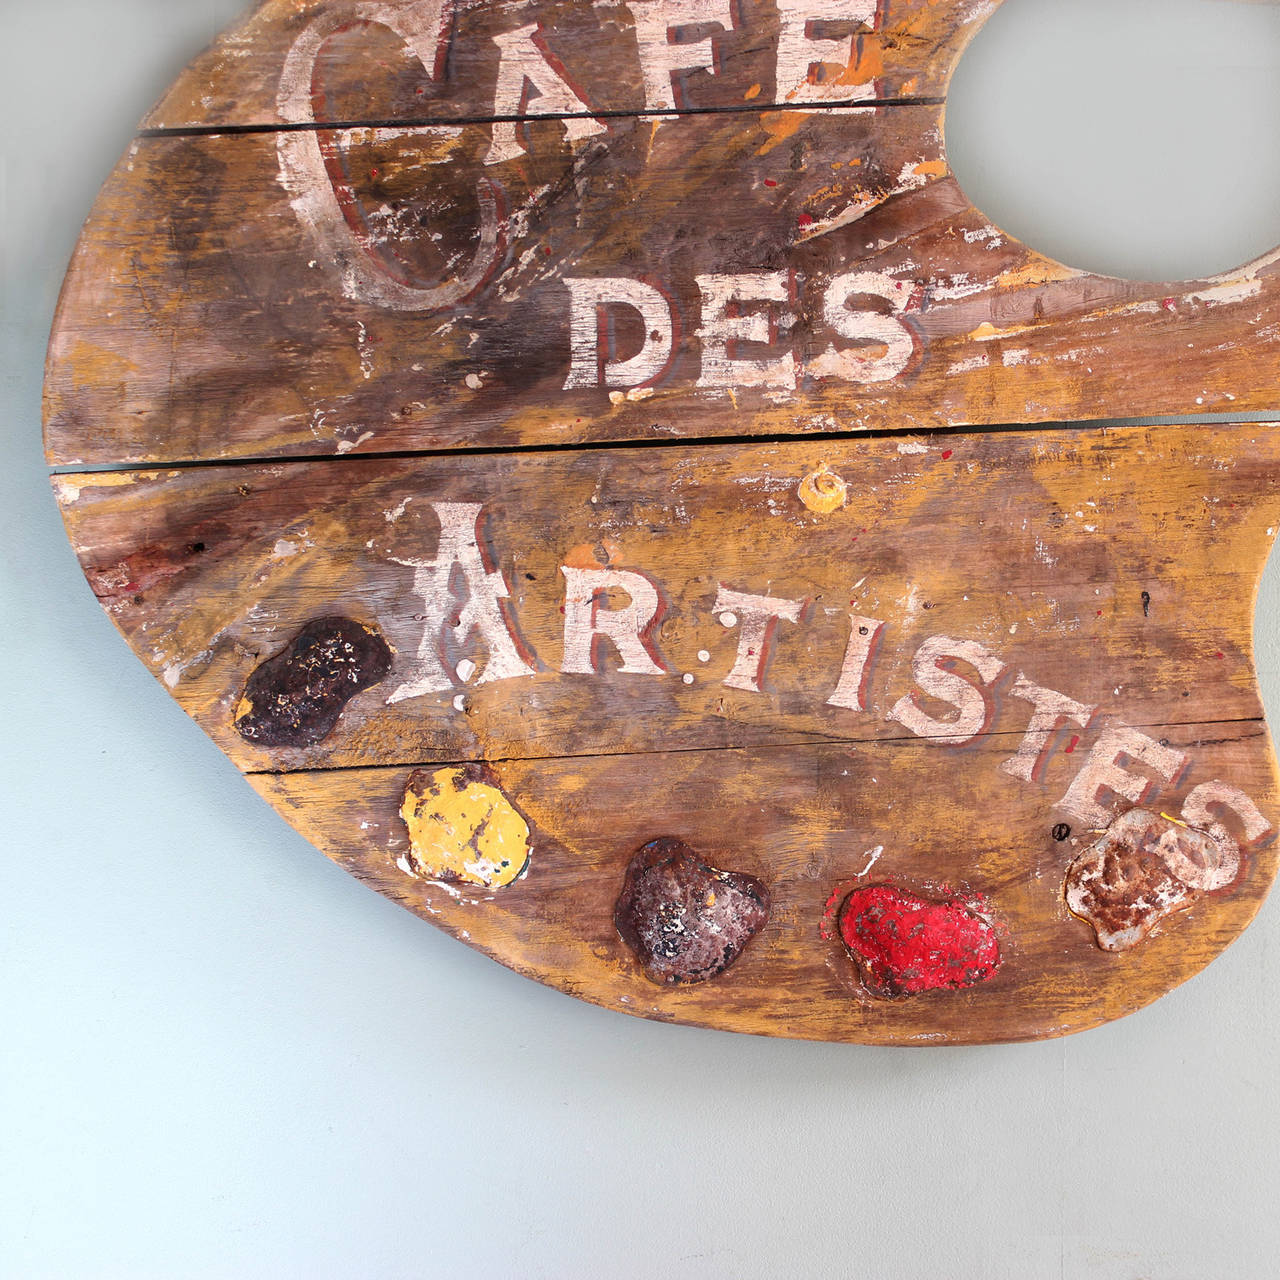 A French Cafe signboard, painted on pinewood, early twentieth century,

Available to view at Brunswick House, London.

80cm high, 87cm wide, 3cm deep.